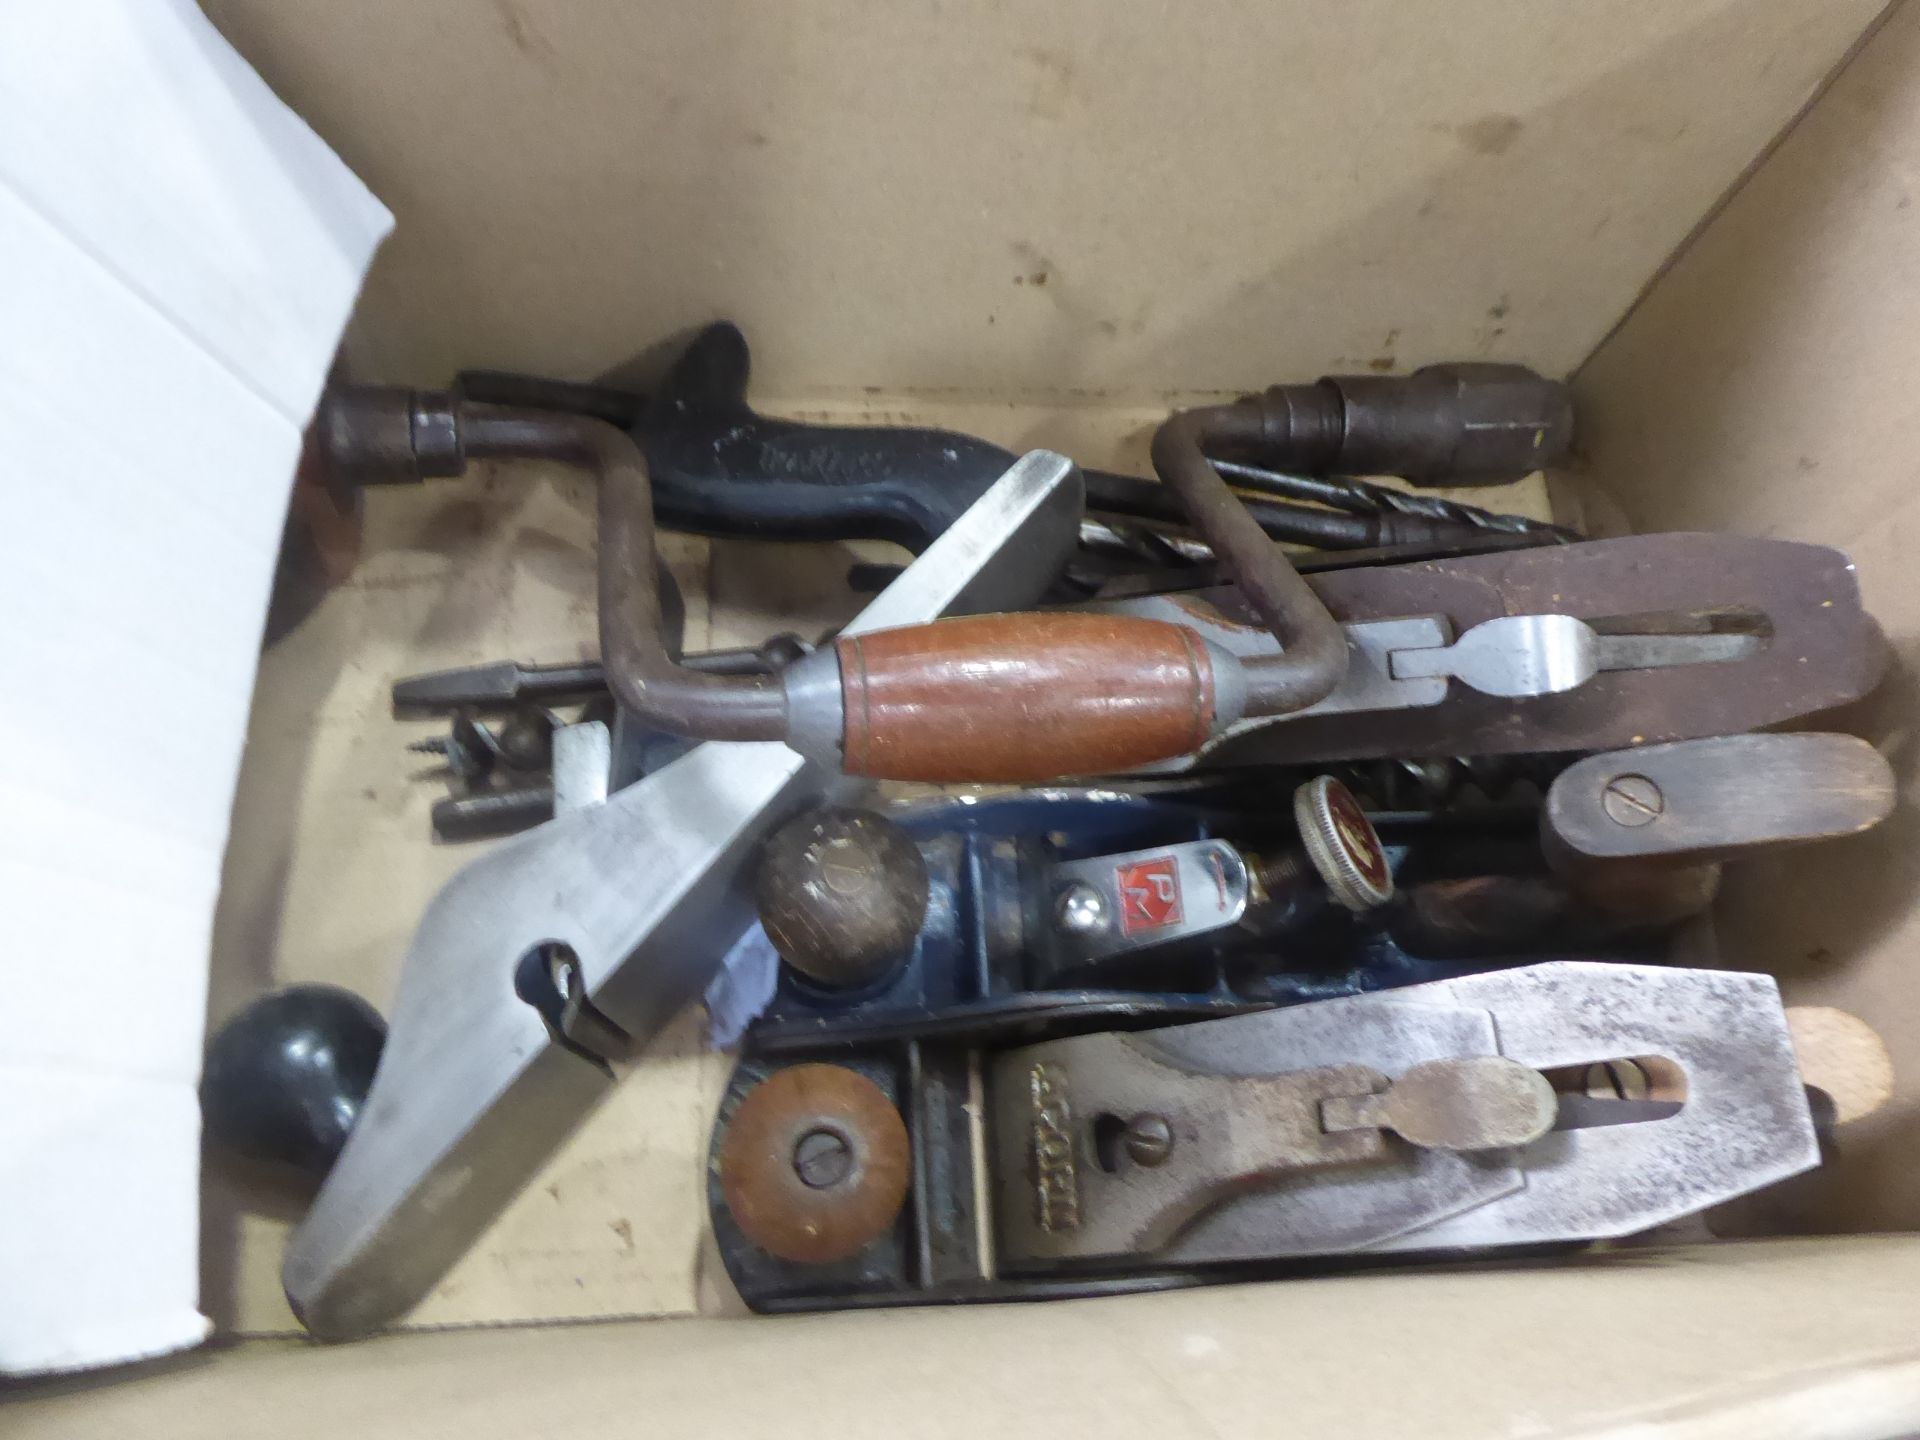 Box of hand planes, hand drills and drill bits